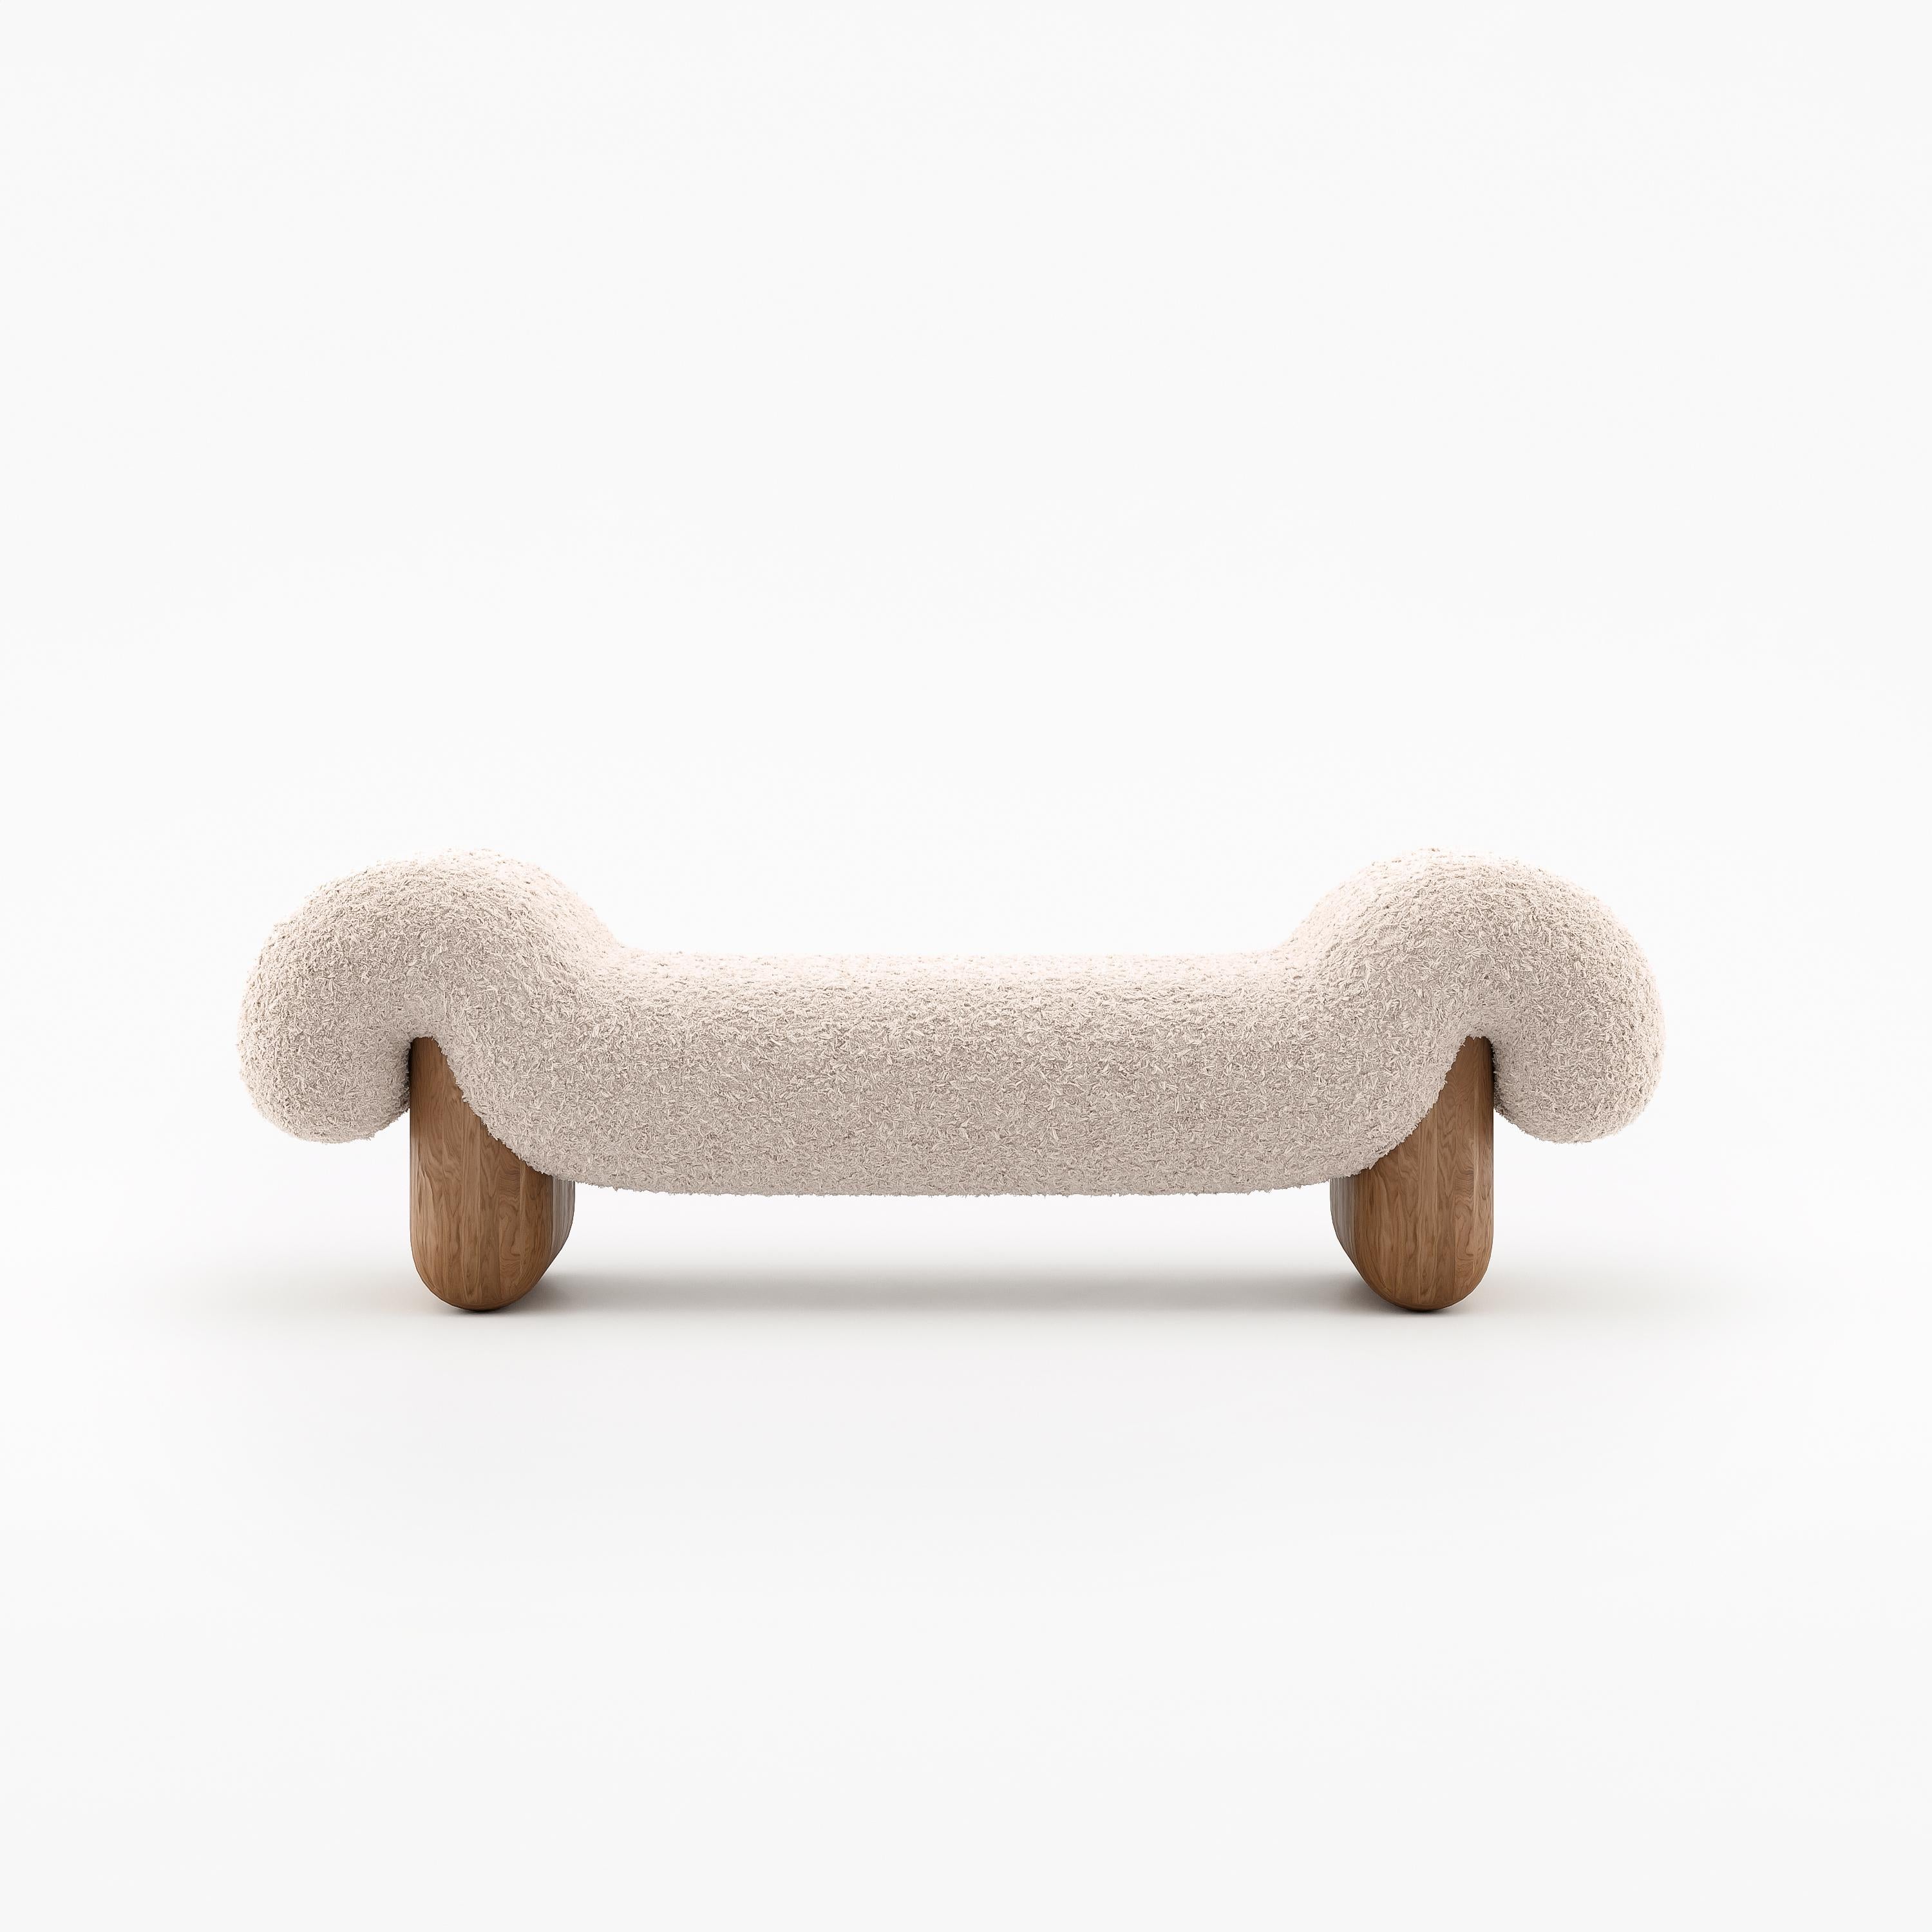 Lamb Ottoman by NUMO
Dimensions: D 166 x W 60 x H 53 cm
Materials: Faux Lamb Fur, Wood
Customizable Size. Please contact us.

 Vladimir Naumov is a professional architect, designer and artist.

While designing the furniture he tries to reach the